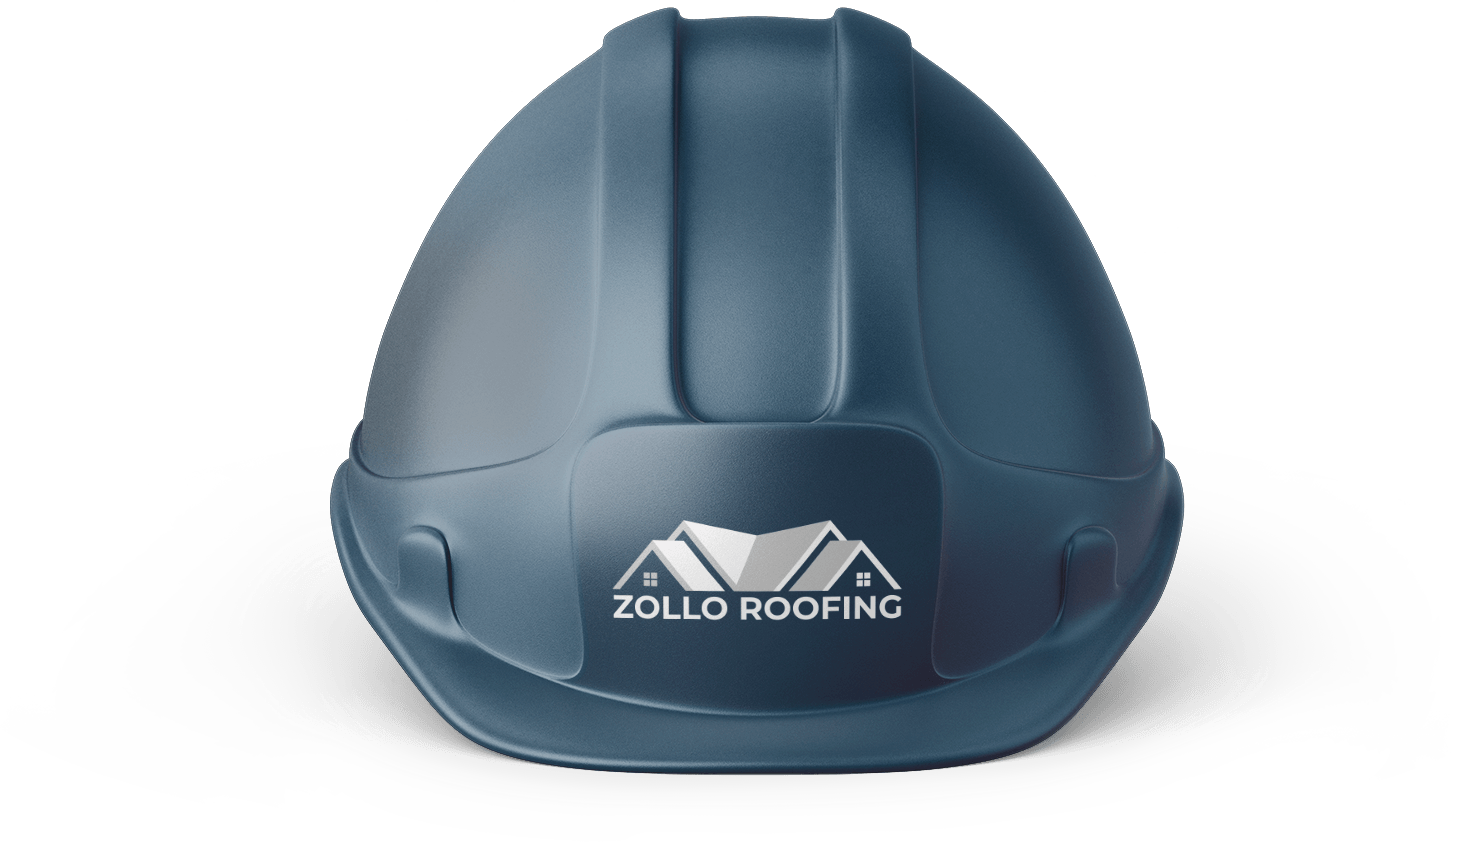 Construction hat zollo roofing